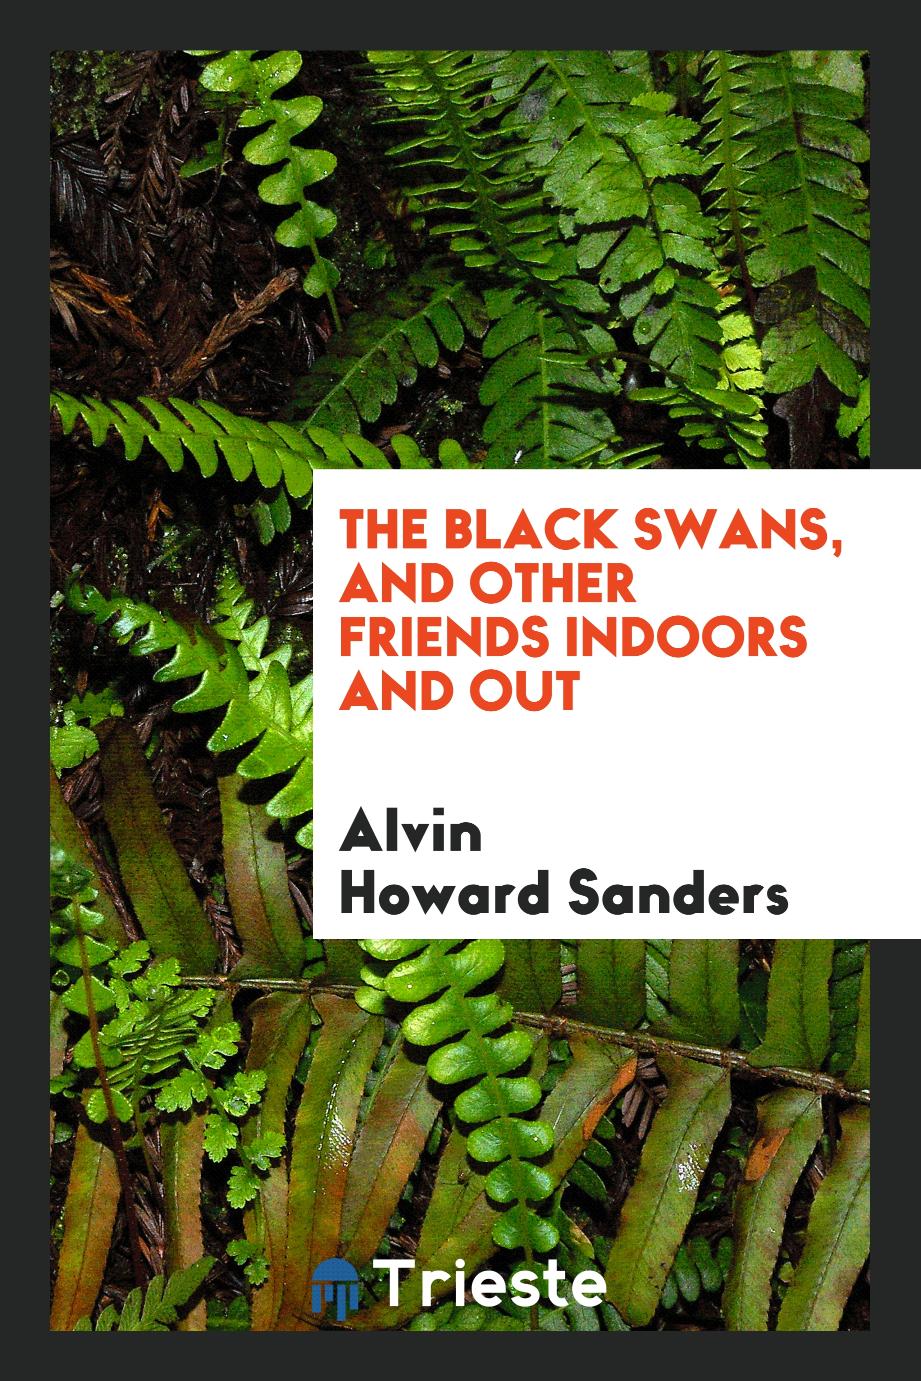 The black swans, and other friends indoors and out